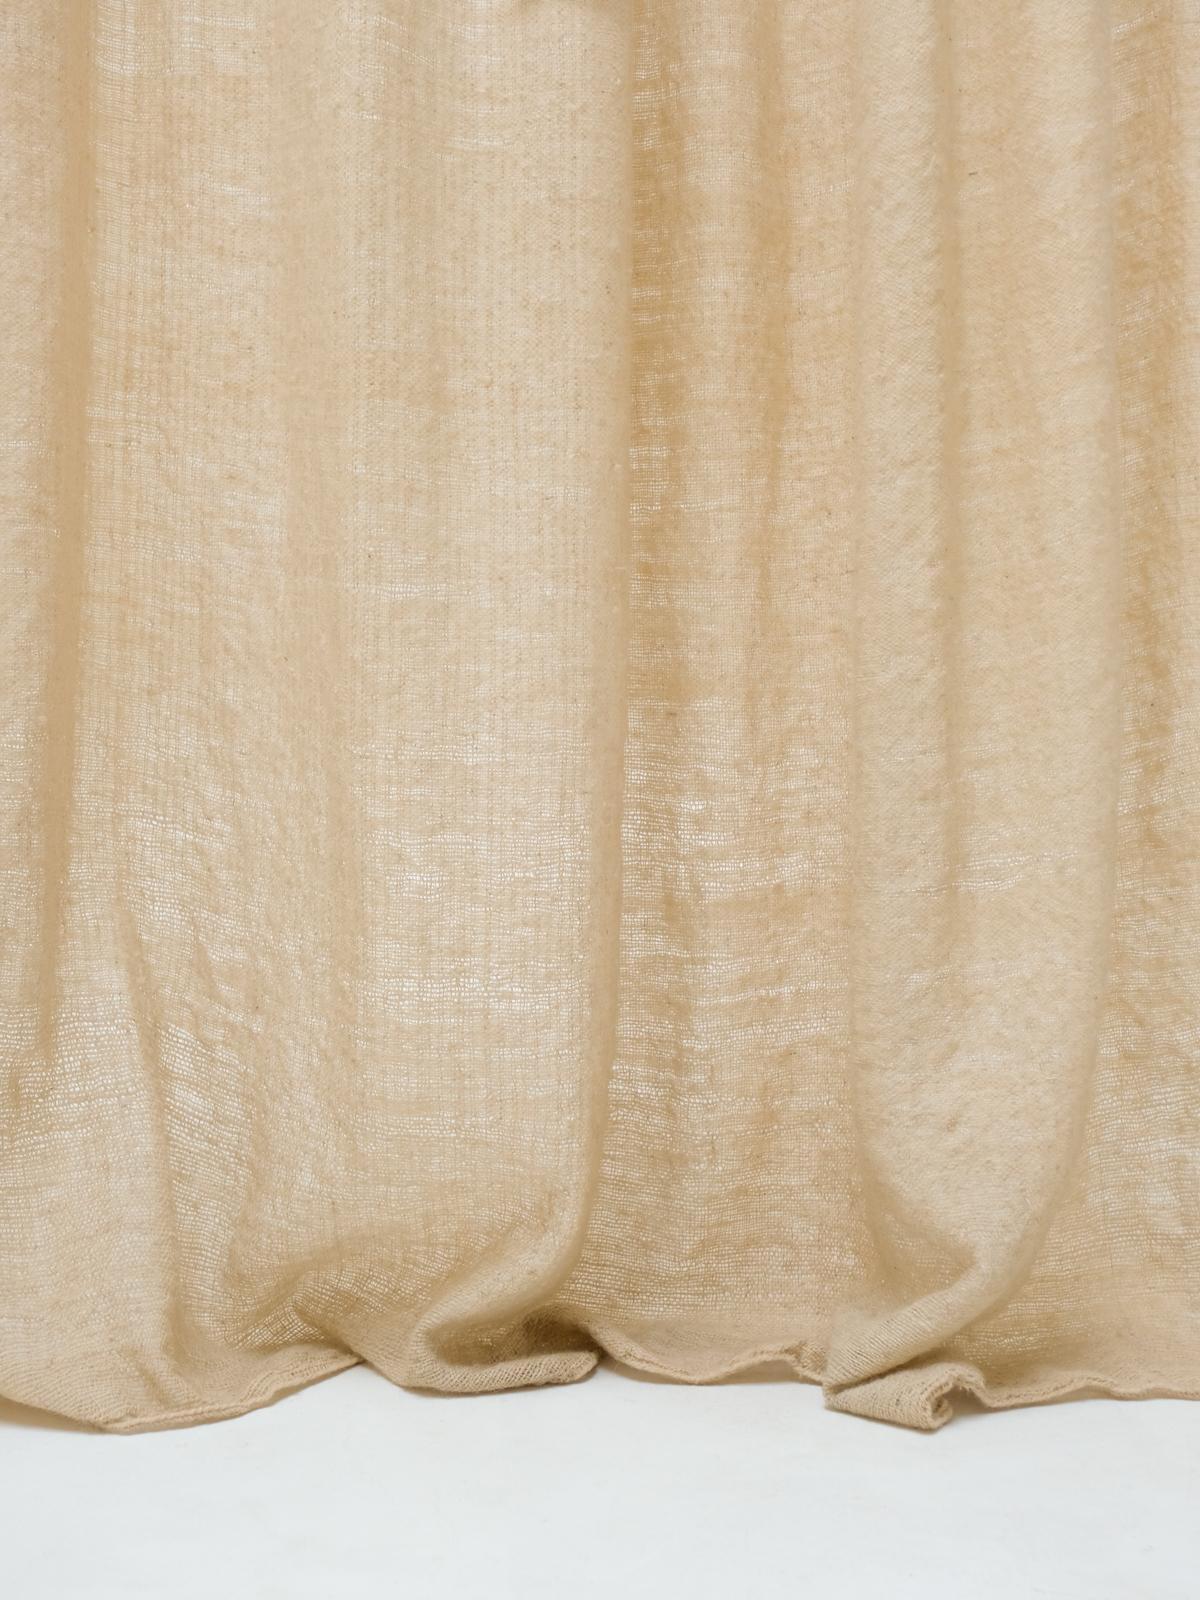 Contemporary Curtains Made of handspun and handwoven local Wool For Sale